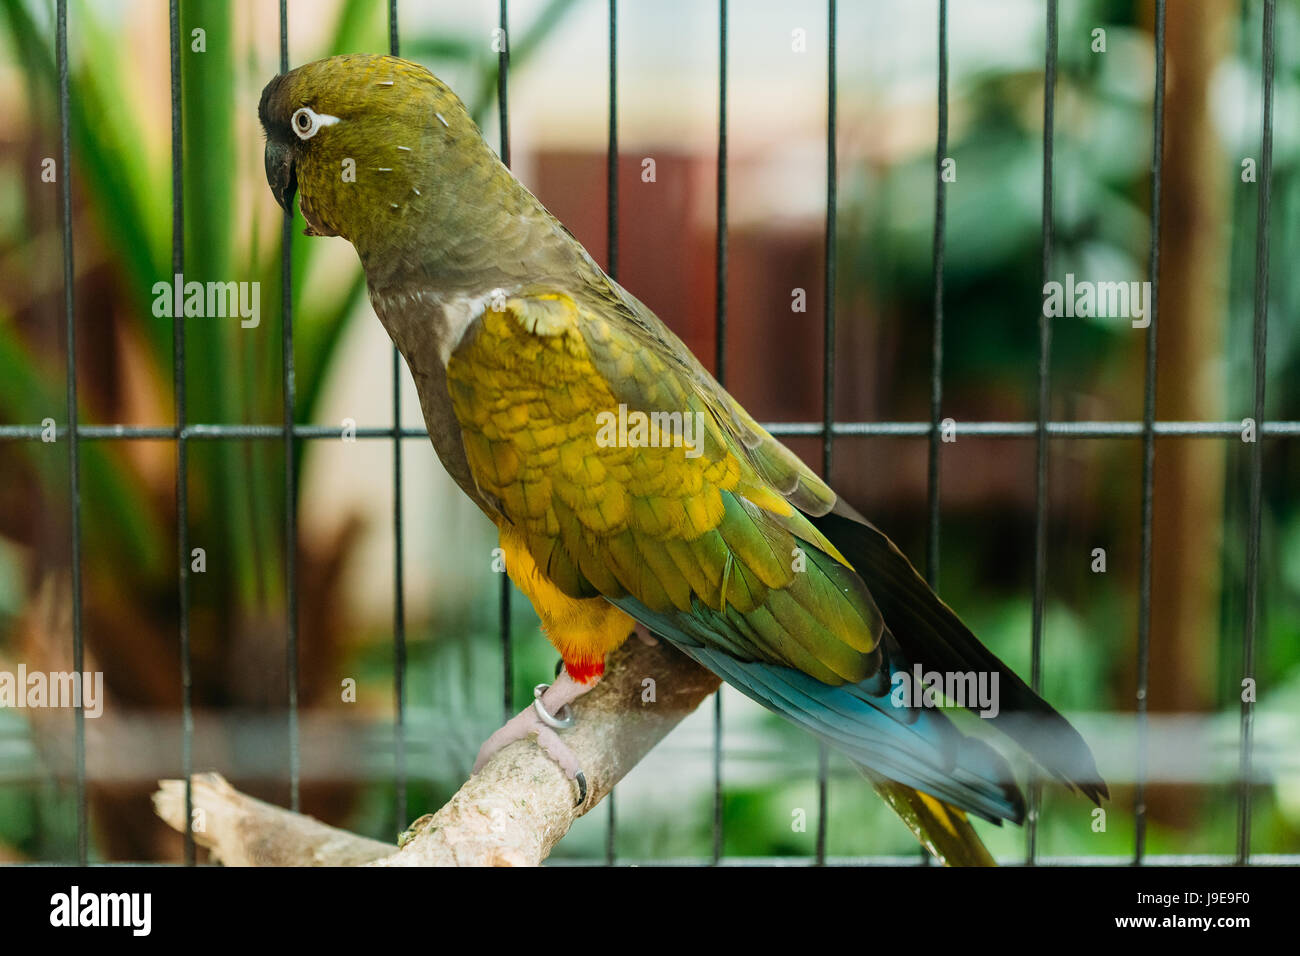 Burrowing Parrot Or Cyanoliseus Patagonus. It Is Also Known As The Patagonian Conure And Burrowing Parakeet. It Is Mainly Found In Argentina. Stock Photo